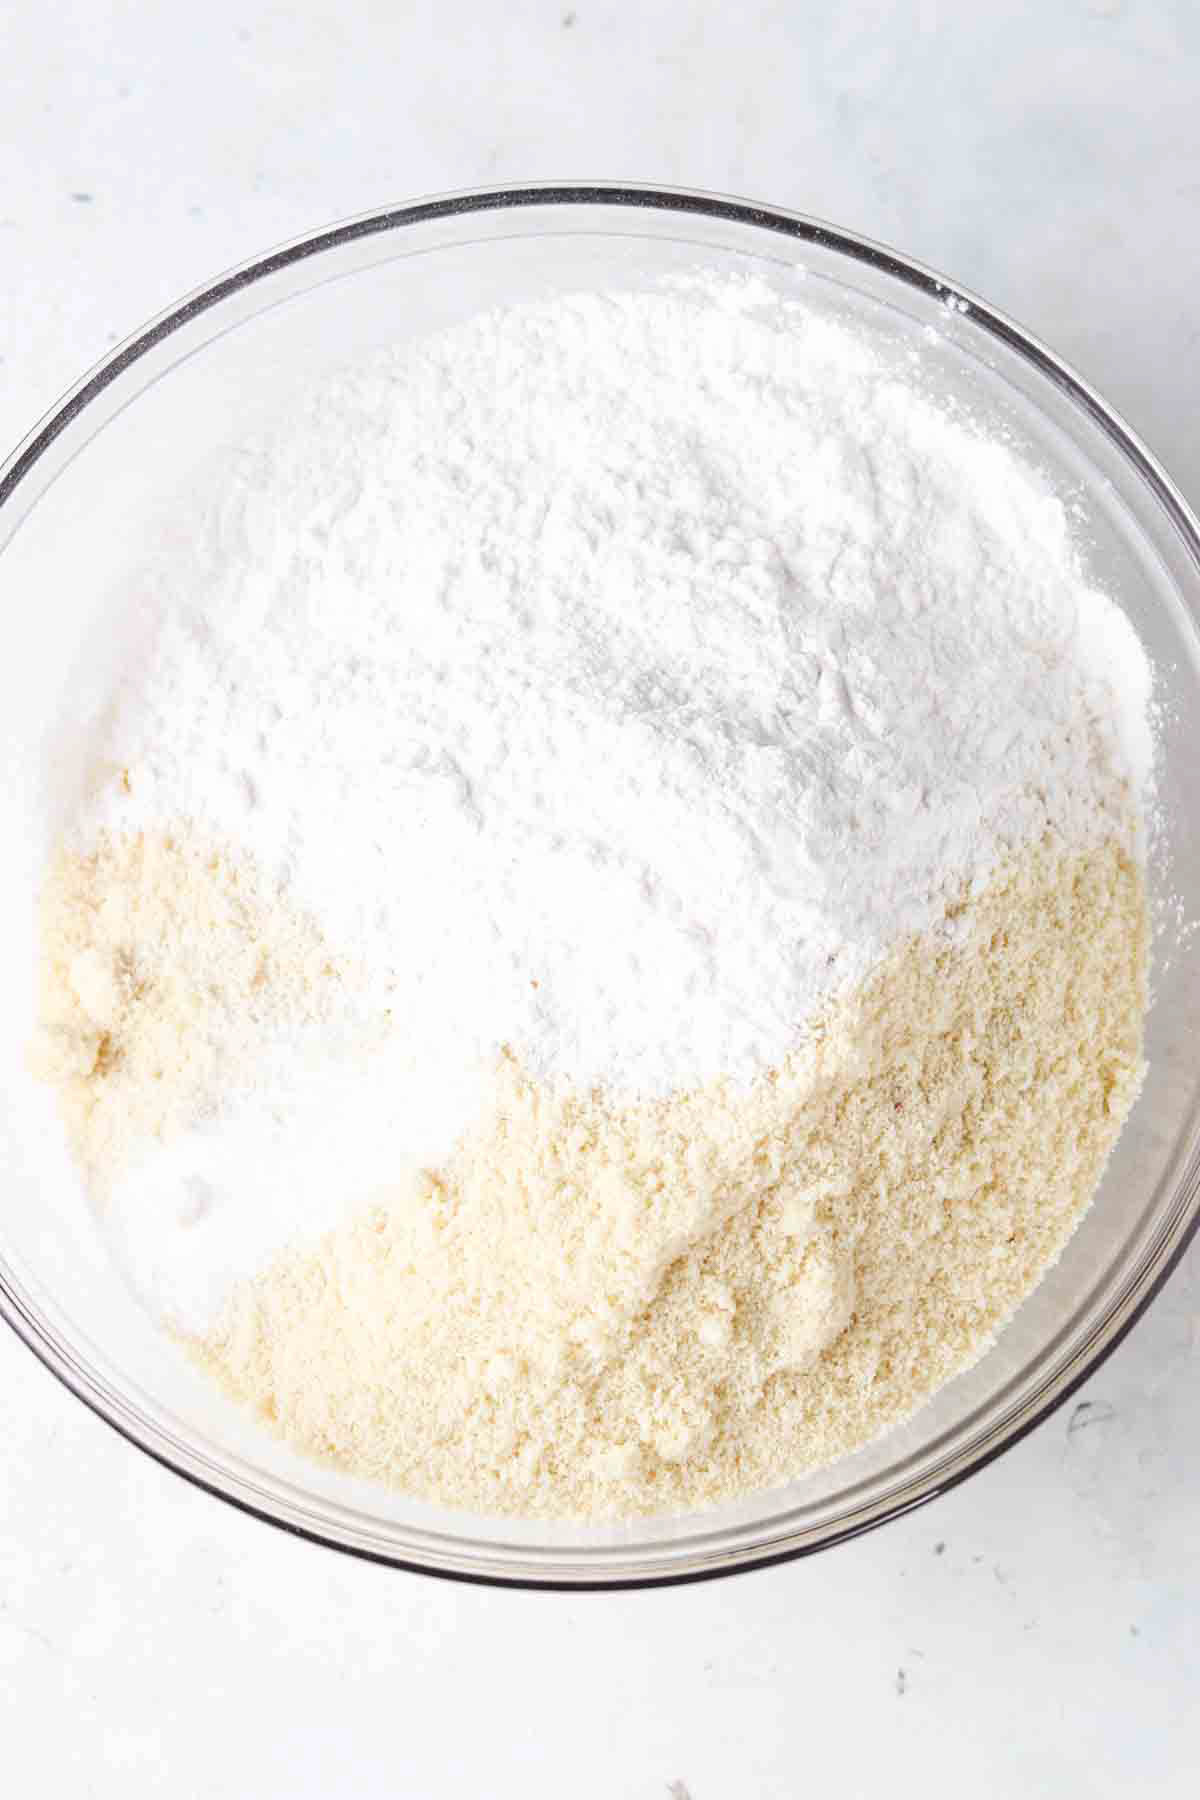 Almond flour, arrowroot powder, baking soda and salt in a clear glass bowl.